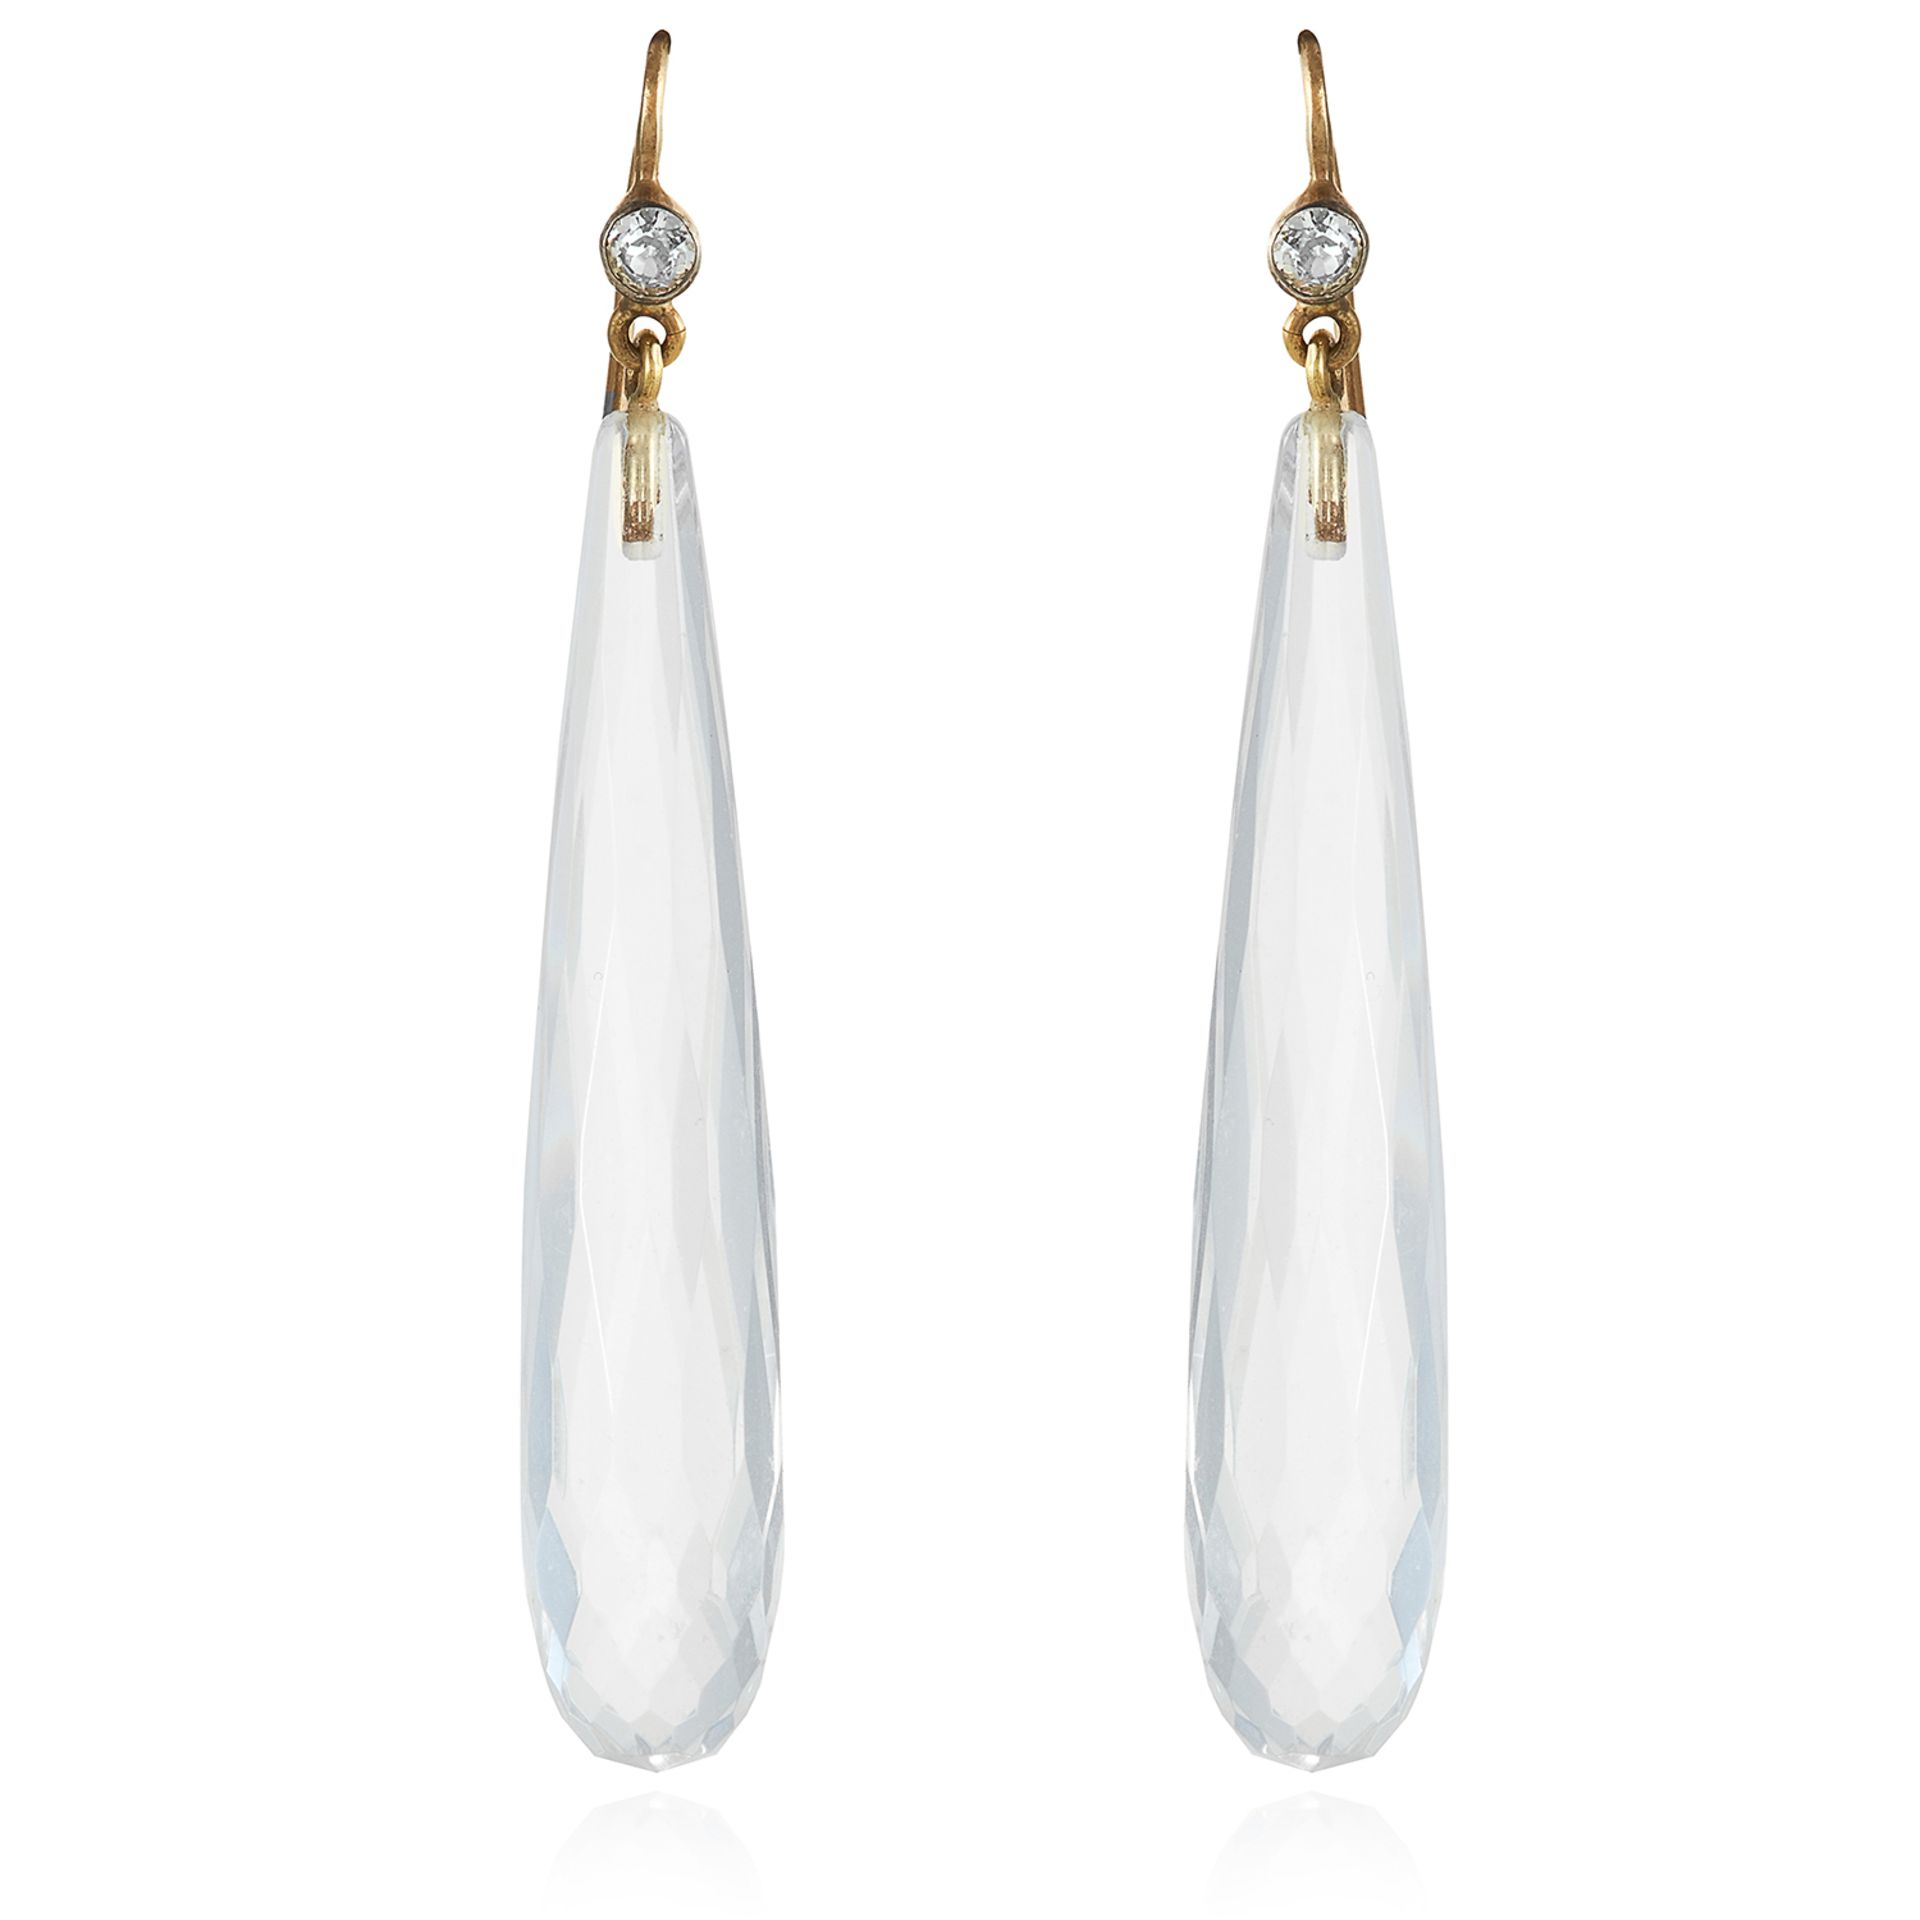 A PAIR OF ROCK CRYSTAL AND DIAMOND EARRINGS in yellow gold, the tapering faceted rock crystal bodies